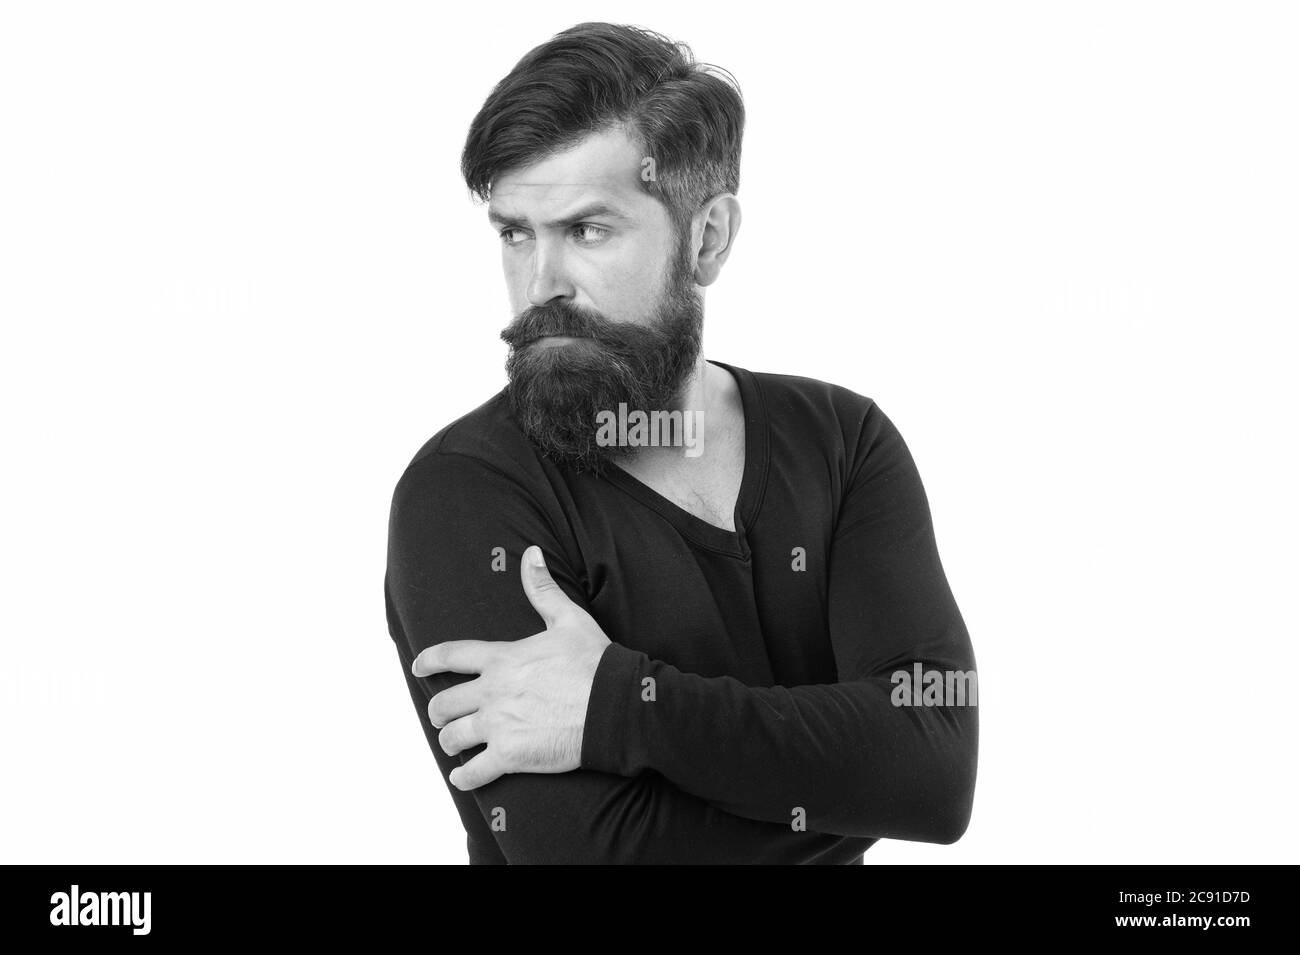 Feeling casual. Bearded mature hipster. autumn male fashion. brutal man after hairdresser or barber. Maintaining masculine look. Man with beard on unshaven face. Street style. modern lifestyle. Stock Photo